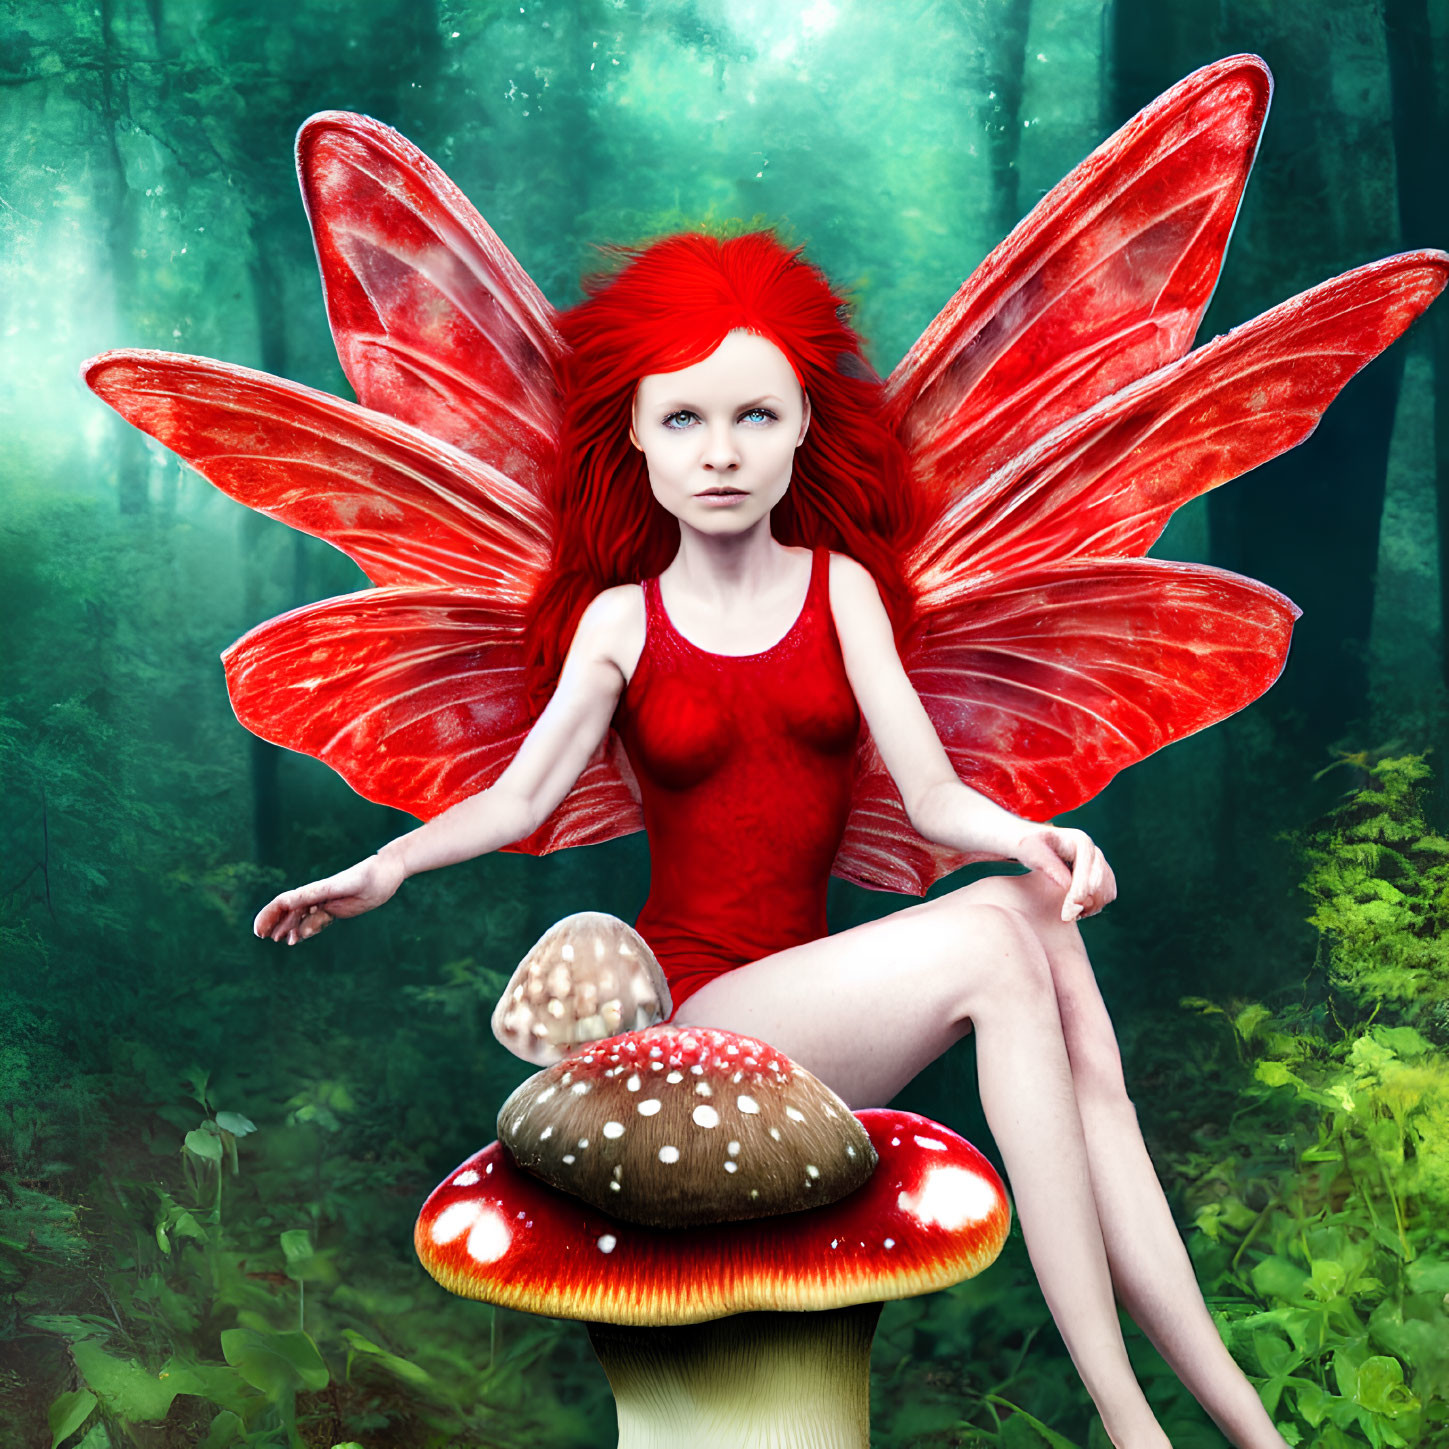 Red-Haired Fairy with Translucent Wings on Mushroom in Enchanted Forest